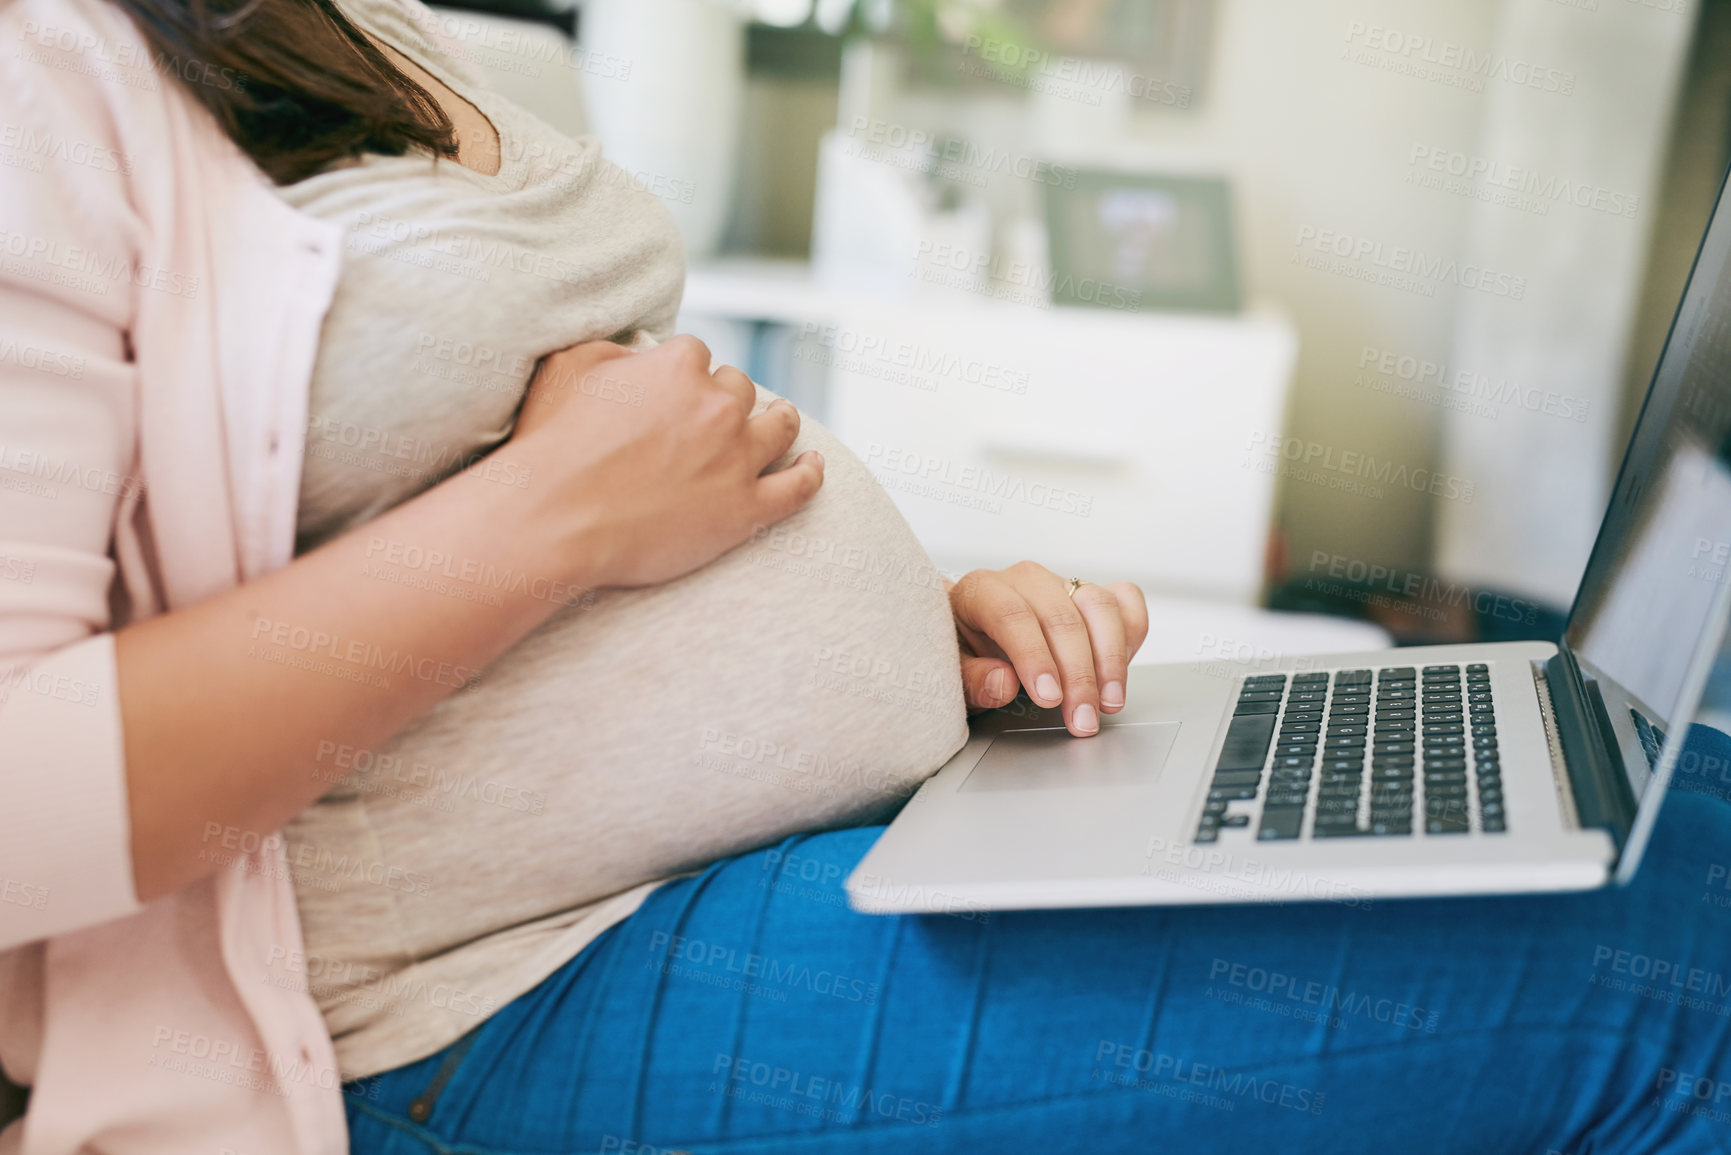 Buy stock photo Shot of an unrecognizable young pregnant woman working from home